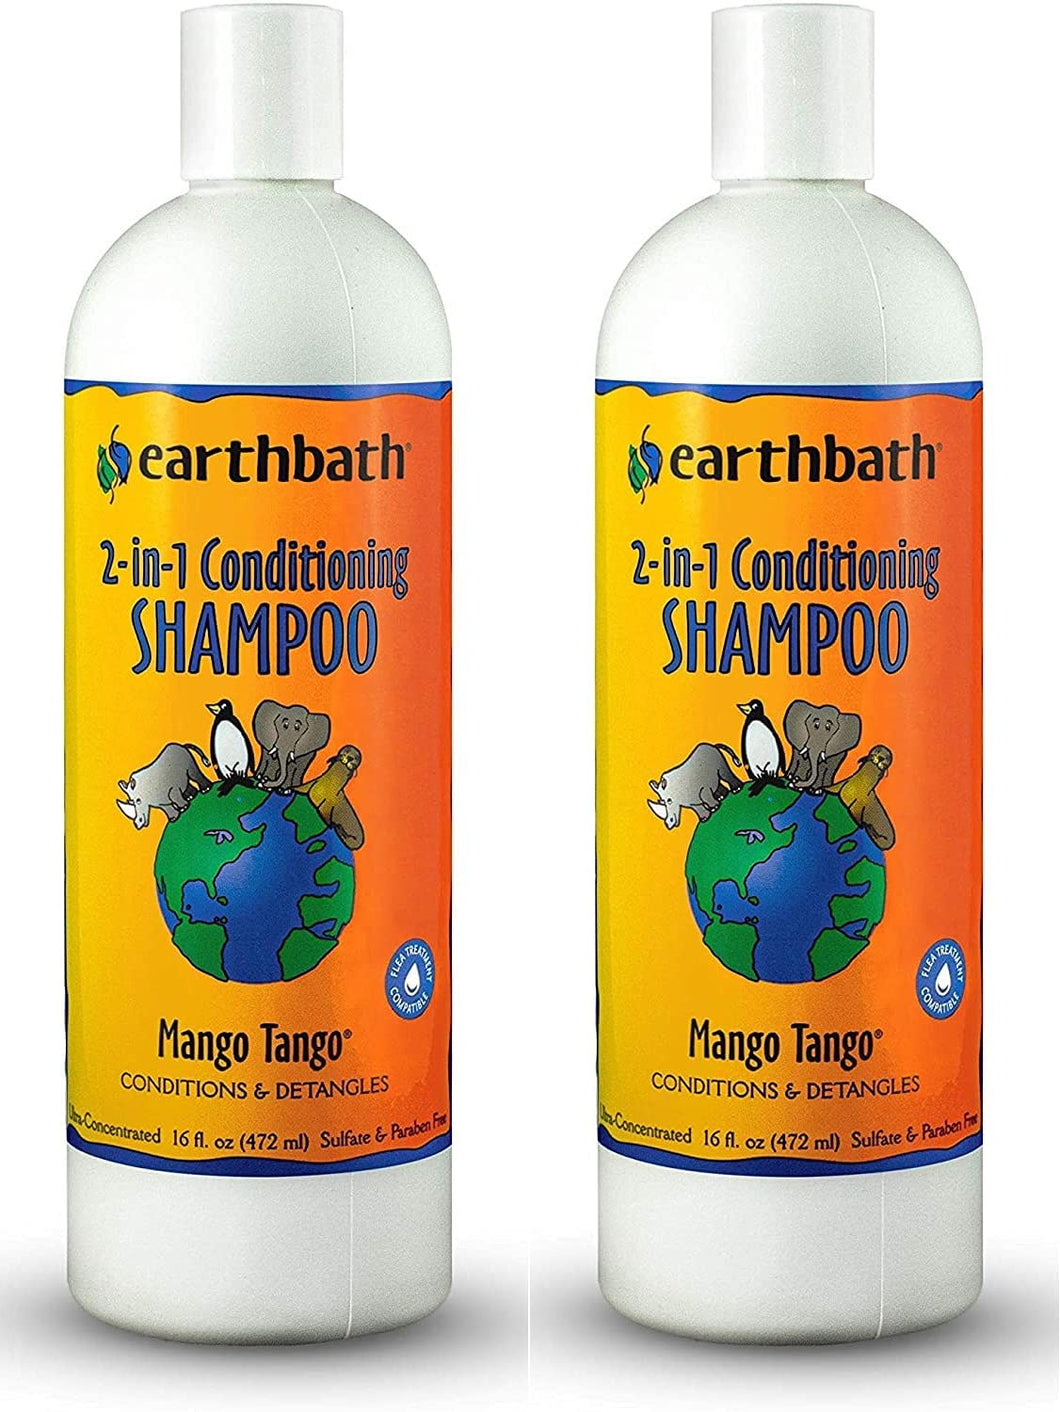 Earthbath 2-in-1 Conditioning Shampoo for Pets Mango Tango (1 Bottle)